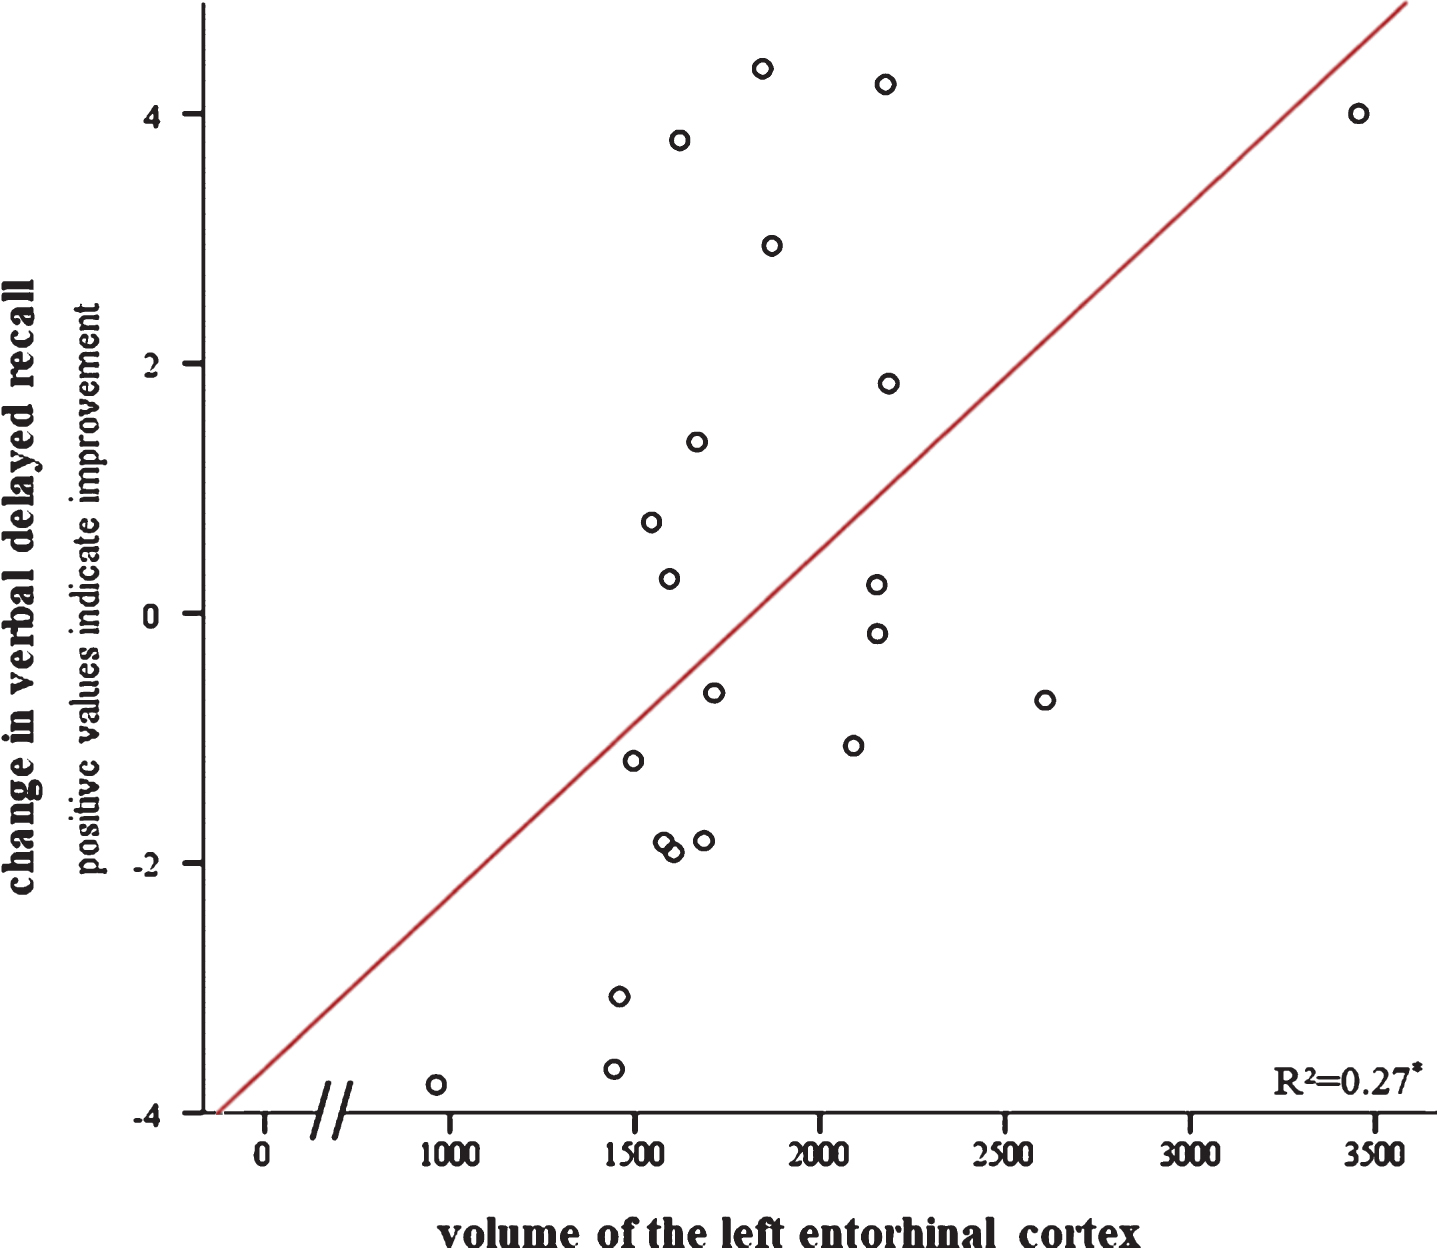 Relationship between change in verbal delayed recall after cognitive training (i.e., pre- to post-intervention) and volume of the left entorhinal cortex. Positive scores on the y-axis indicate improvement. Significant at *p < 0.05.